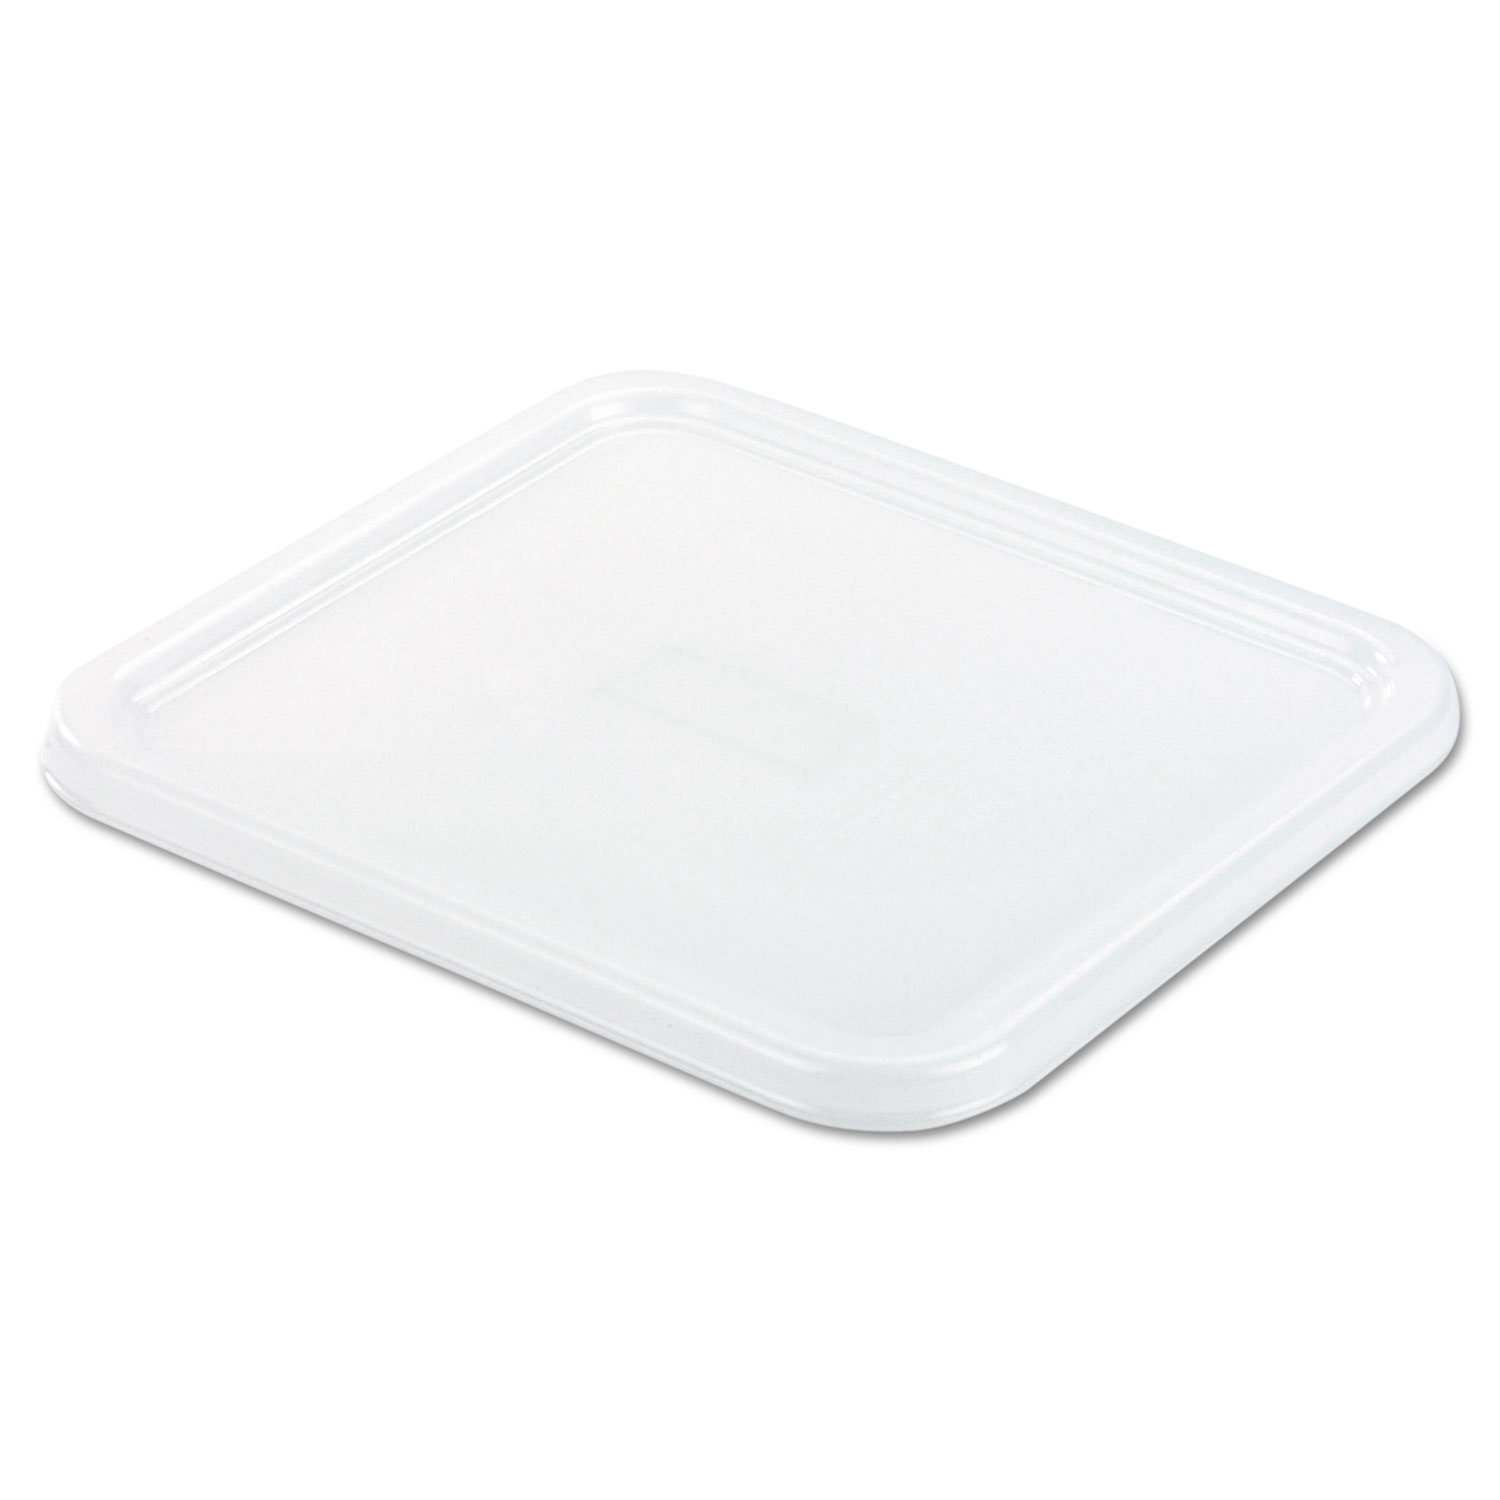  Rubbermaid Commercial FG650900WHT SpaceSaver Square Container Lids, 8 4/5w x 8 3/4d, White (RCP6509WHI) 